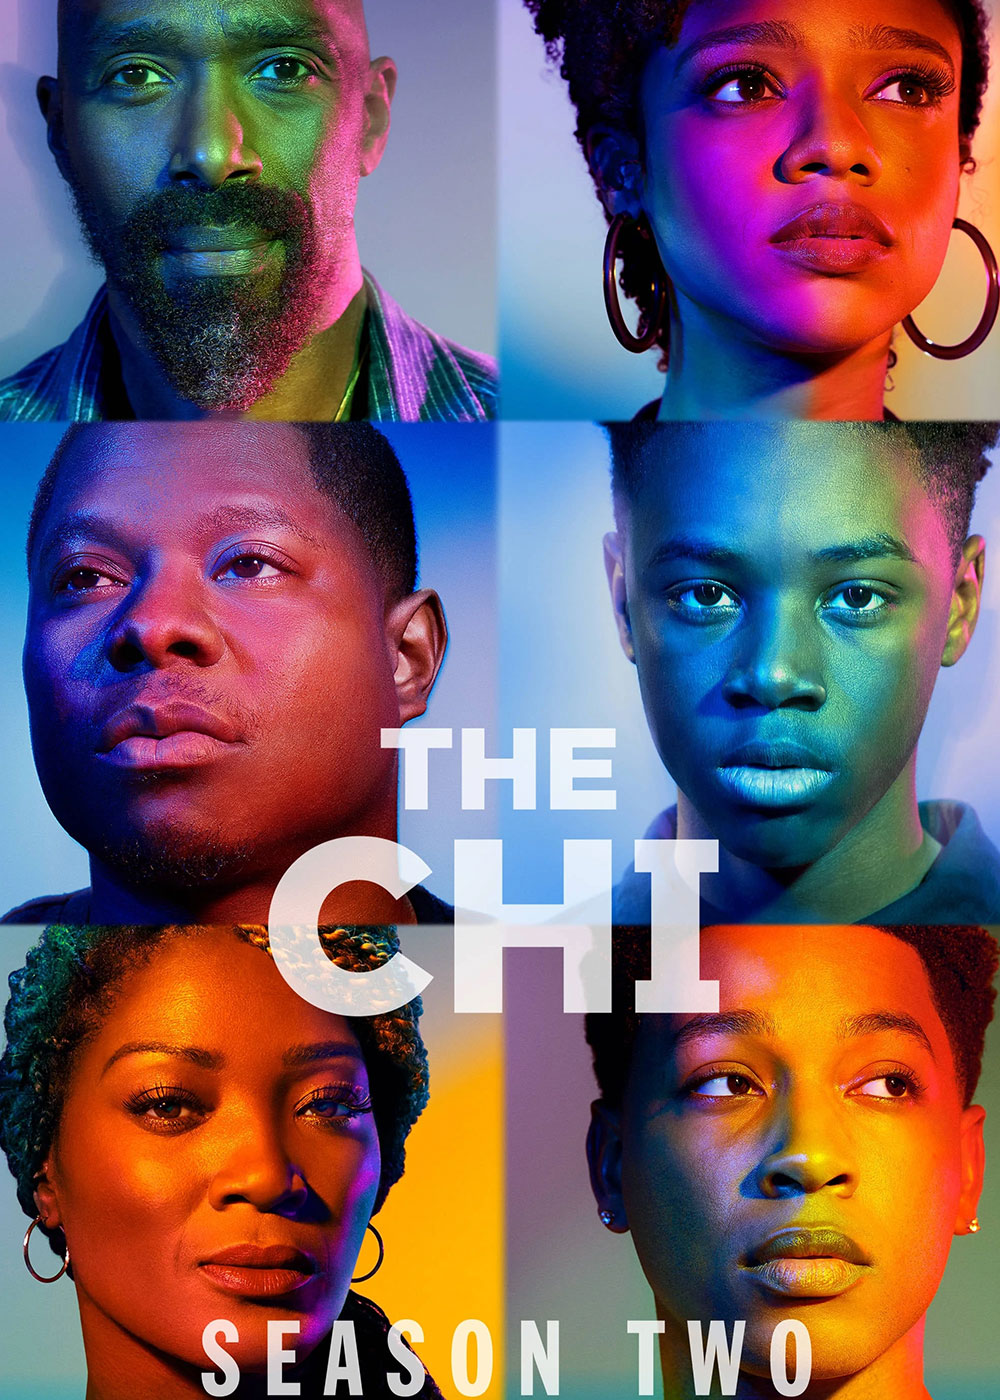 The Chi Season 2 TV Series (2019) Release Date, Review, Cast, Trailer